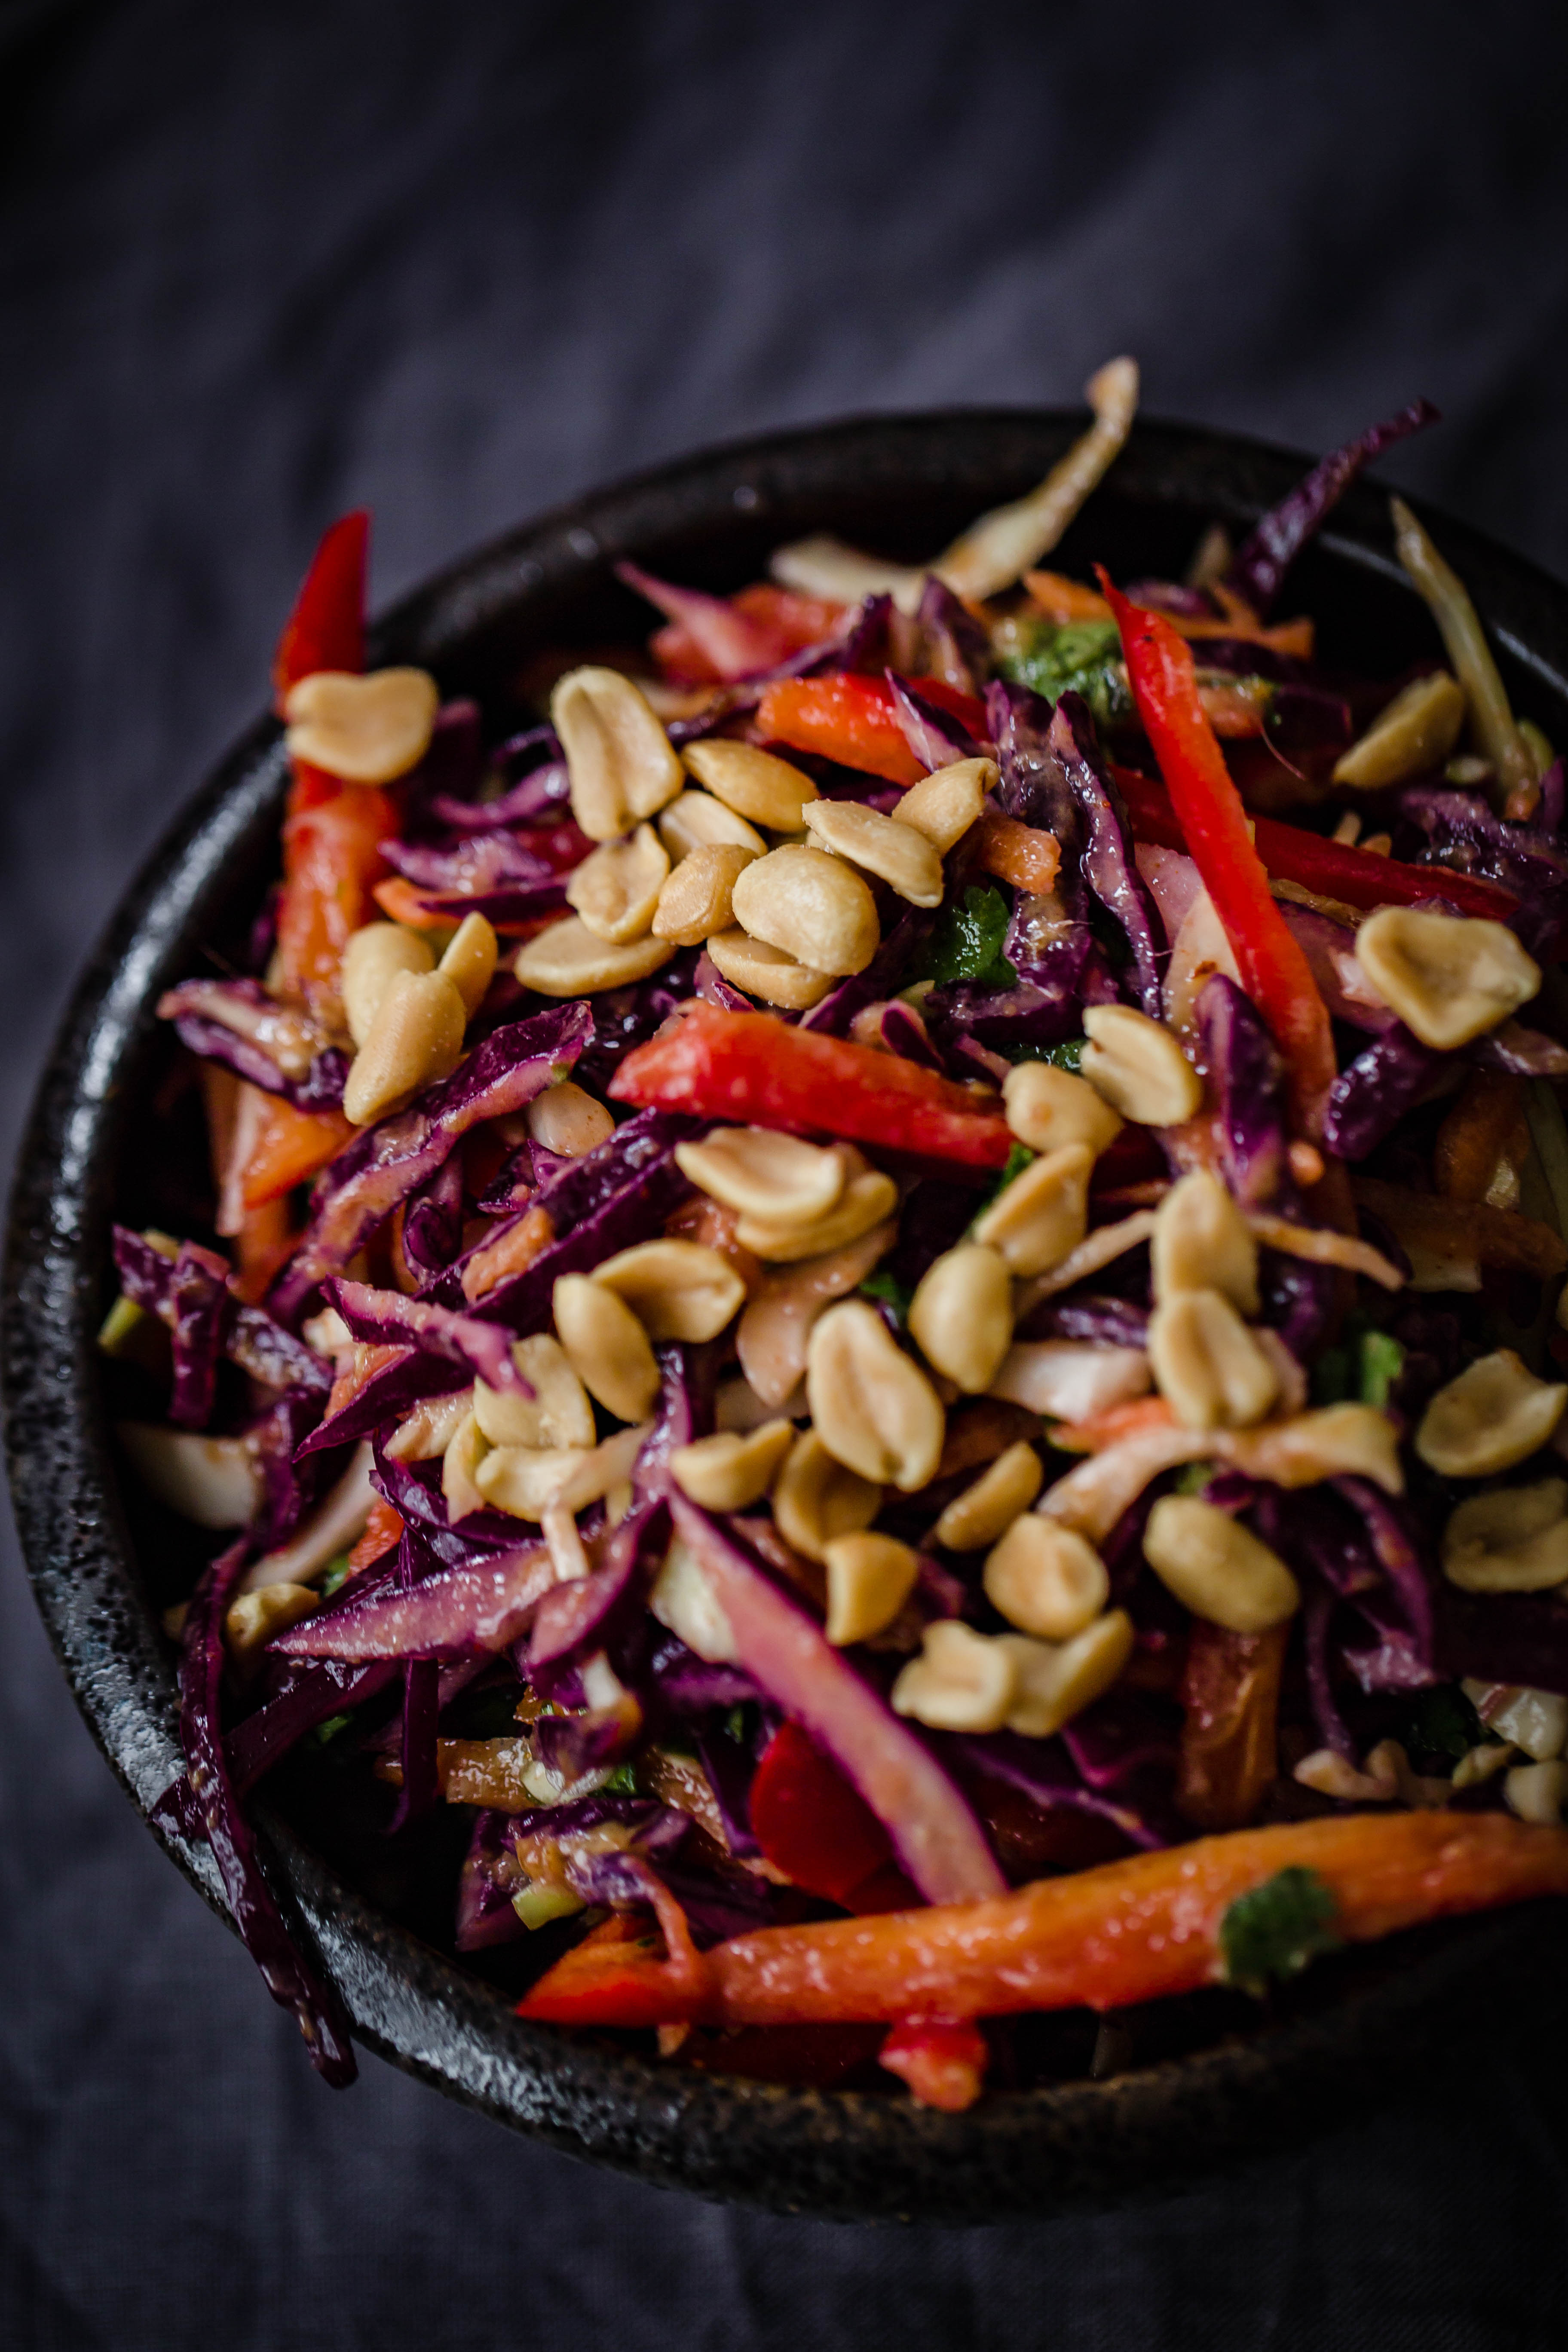 Red Cabbage, Red Pepper, Coriander and Peanuts in a black bowl on a grey creased towel